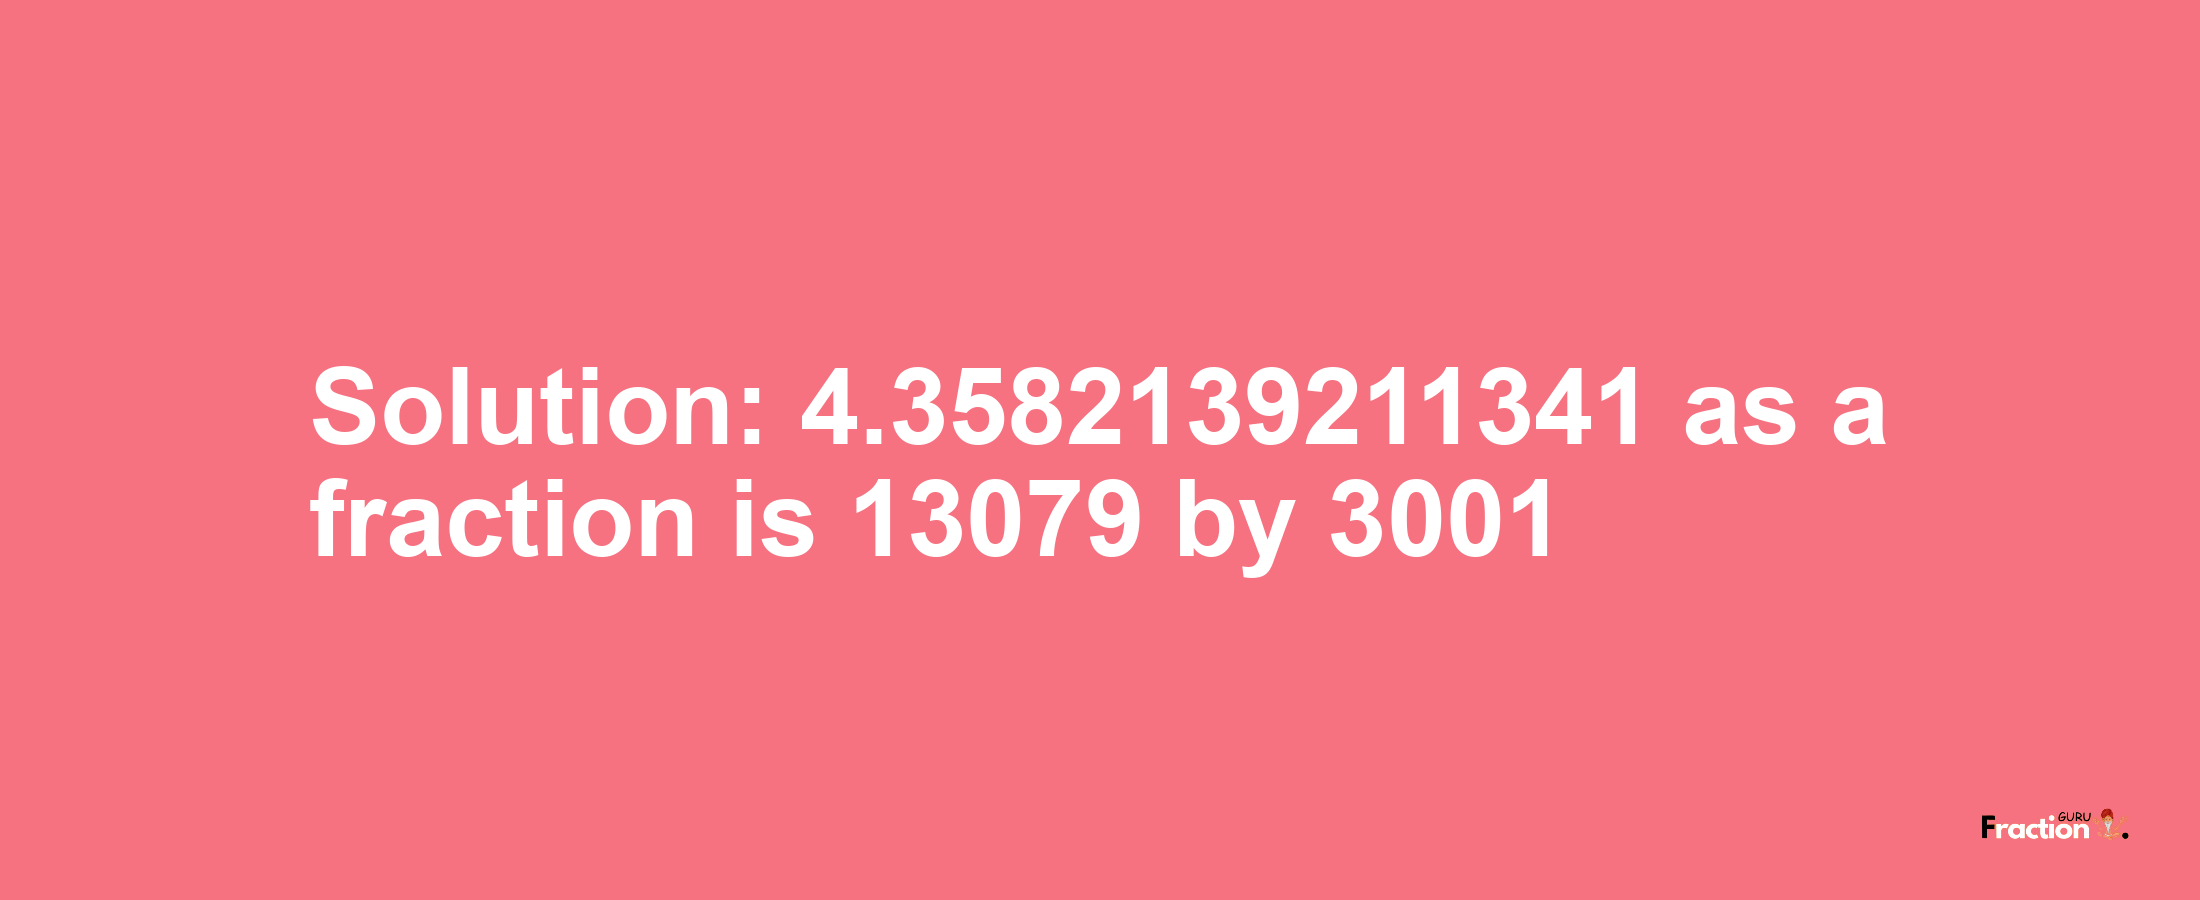 Solution:4.3582139211341 as a fraction is 13079/3001